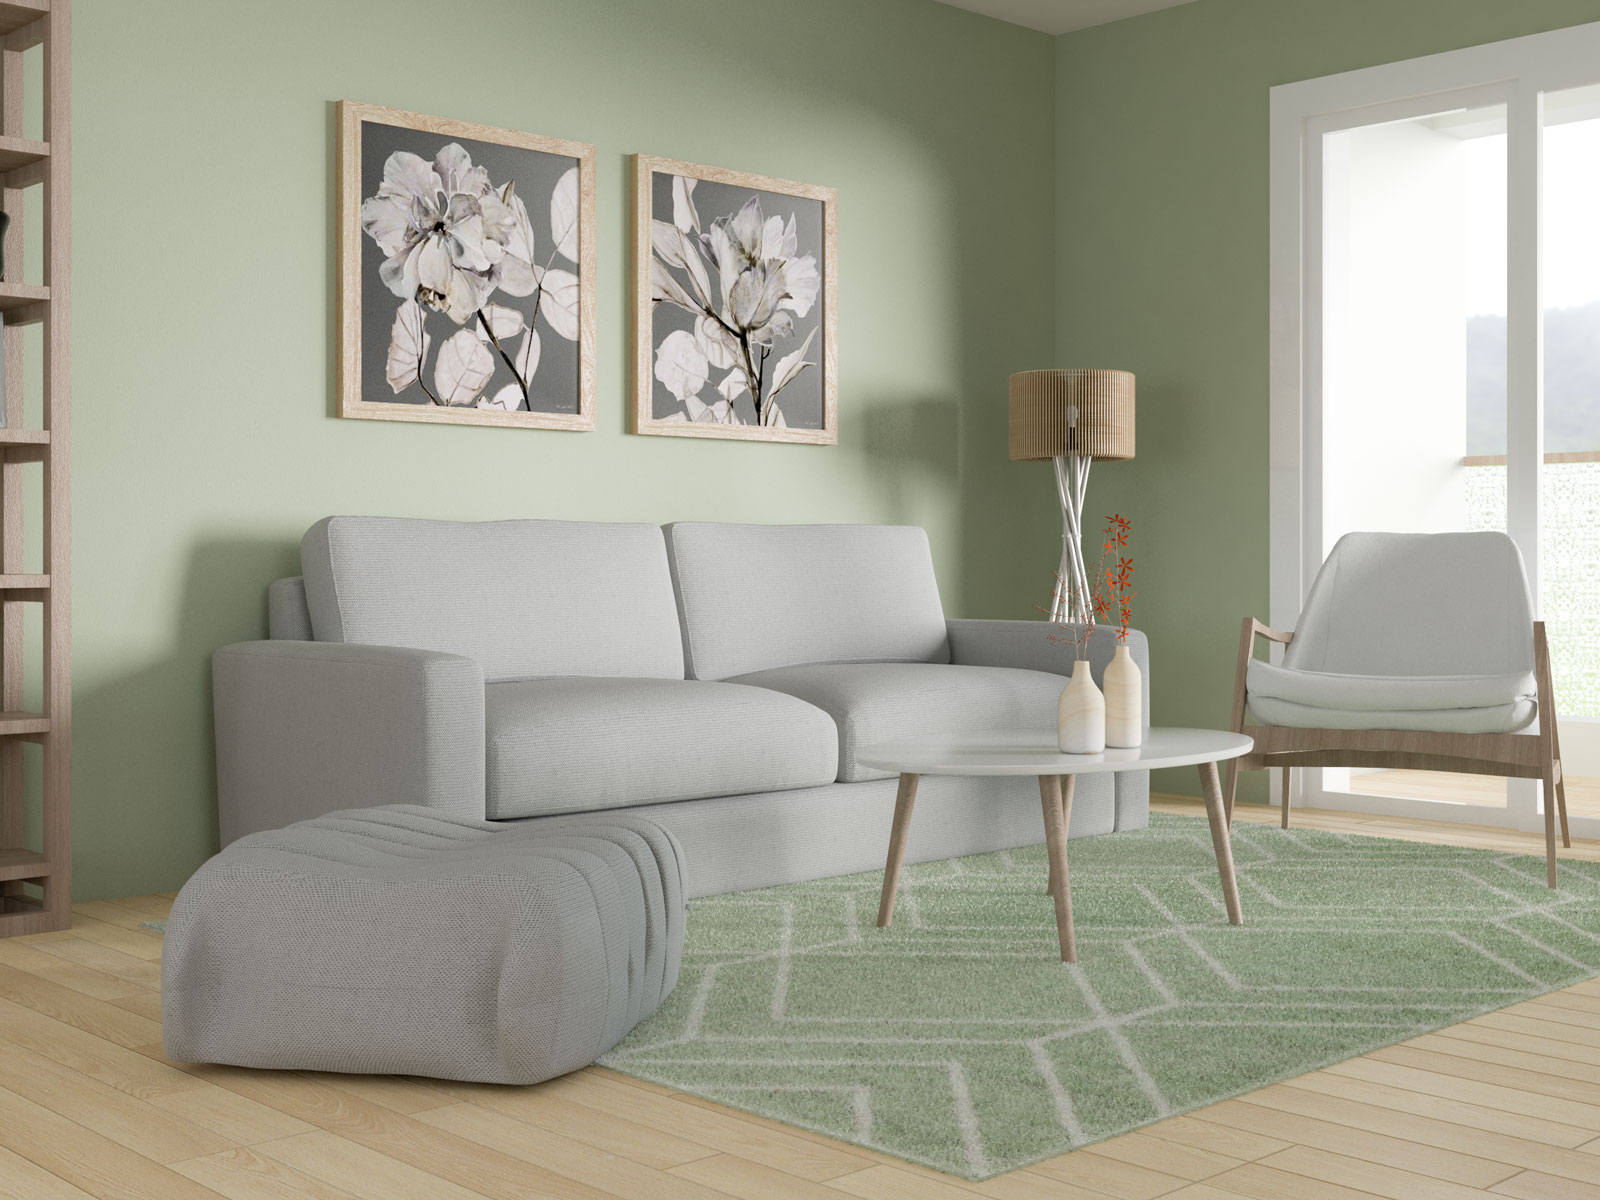 Living room with light gray furniture and sage green walls